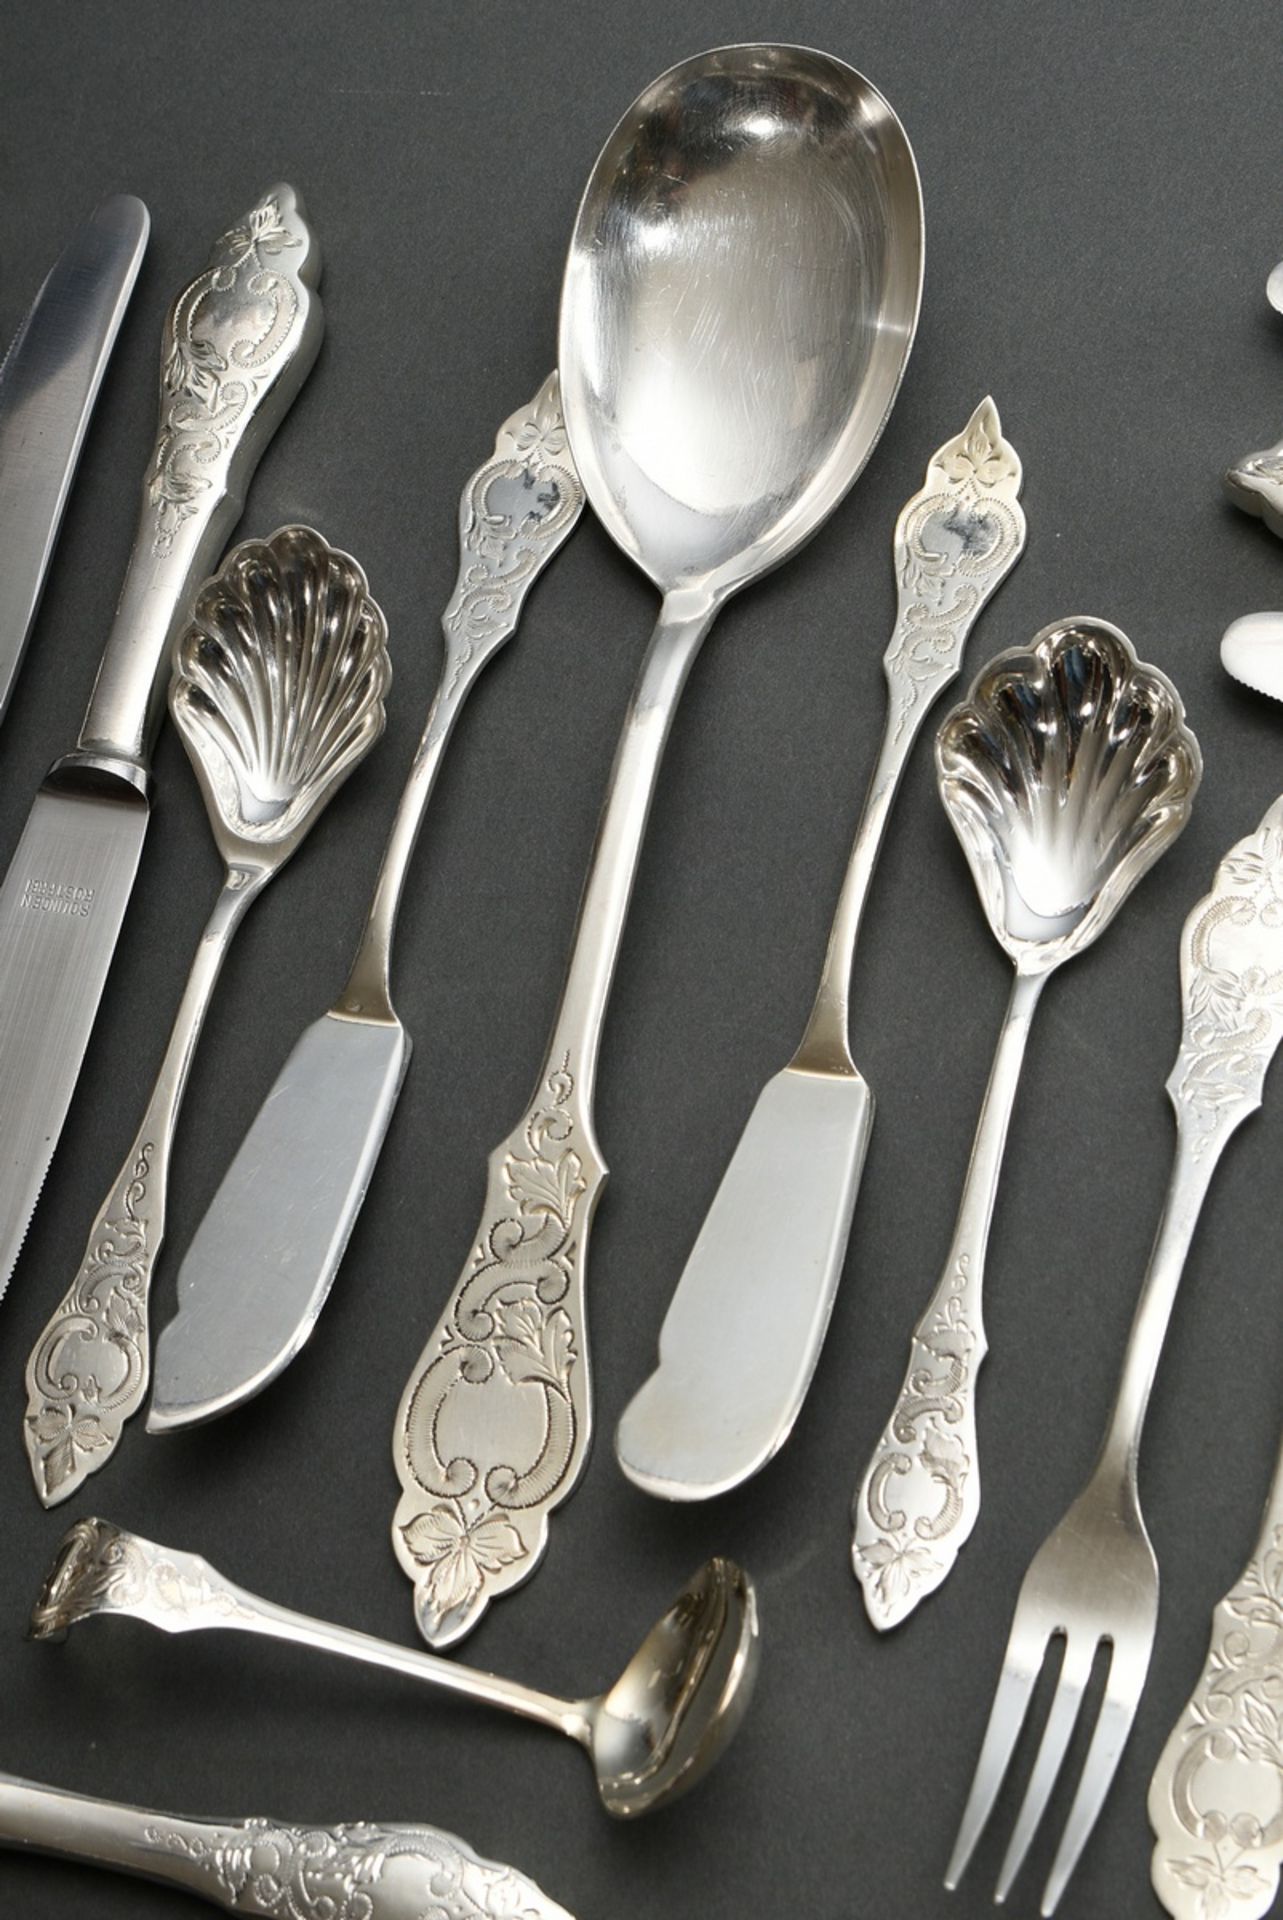 118 pieces Robbe & Berking cutlery ‘Ostfriesenmuster’, silver 800, 2182g (without knives), consisti - Image 11 of 12